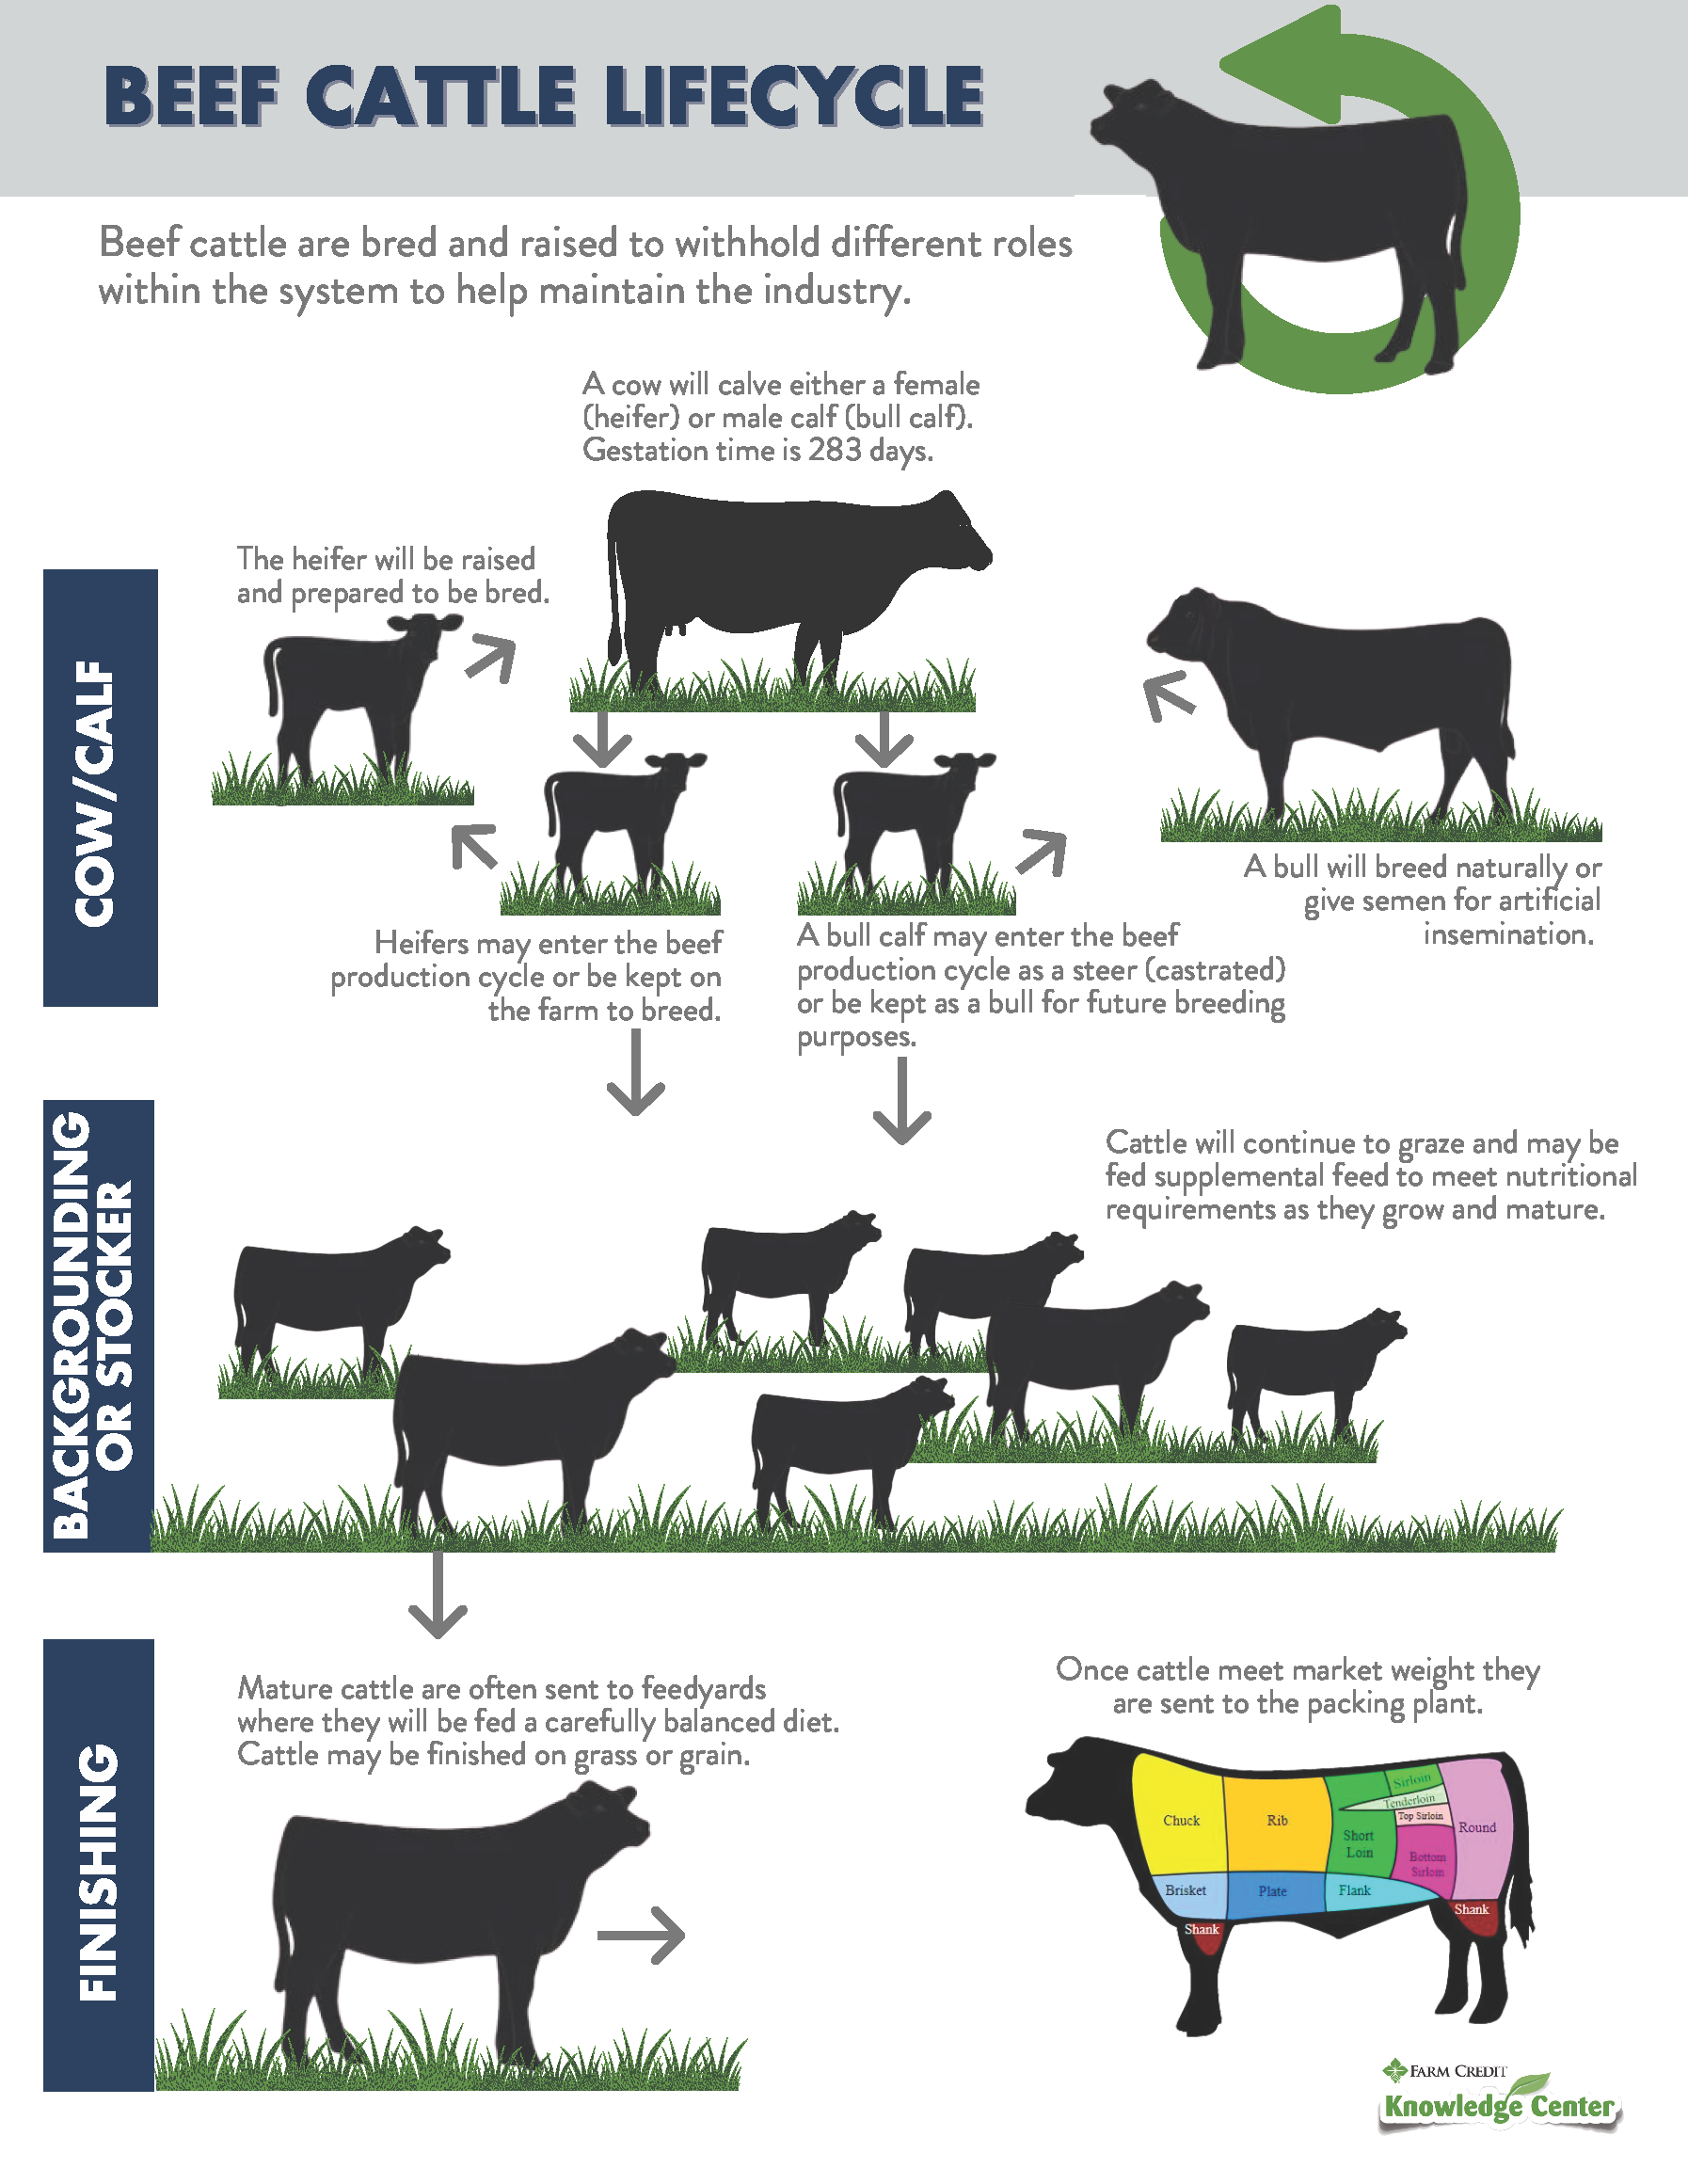 Beef cattle lifecycle infographic